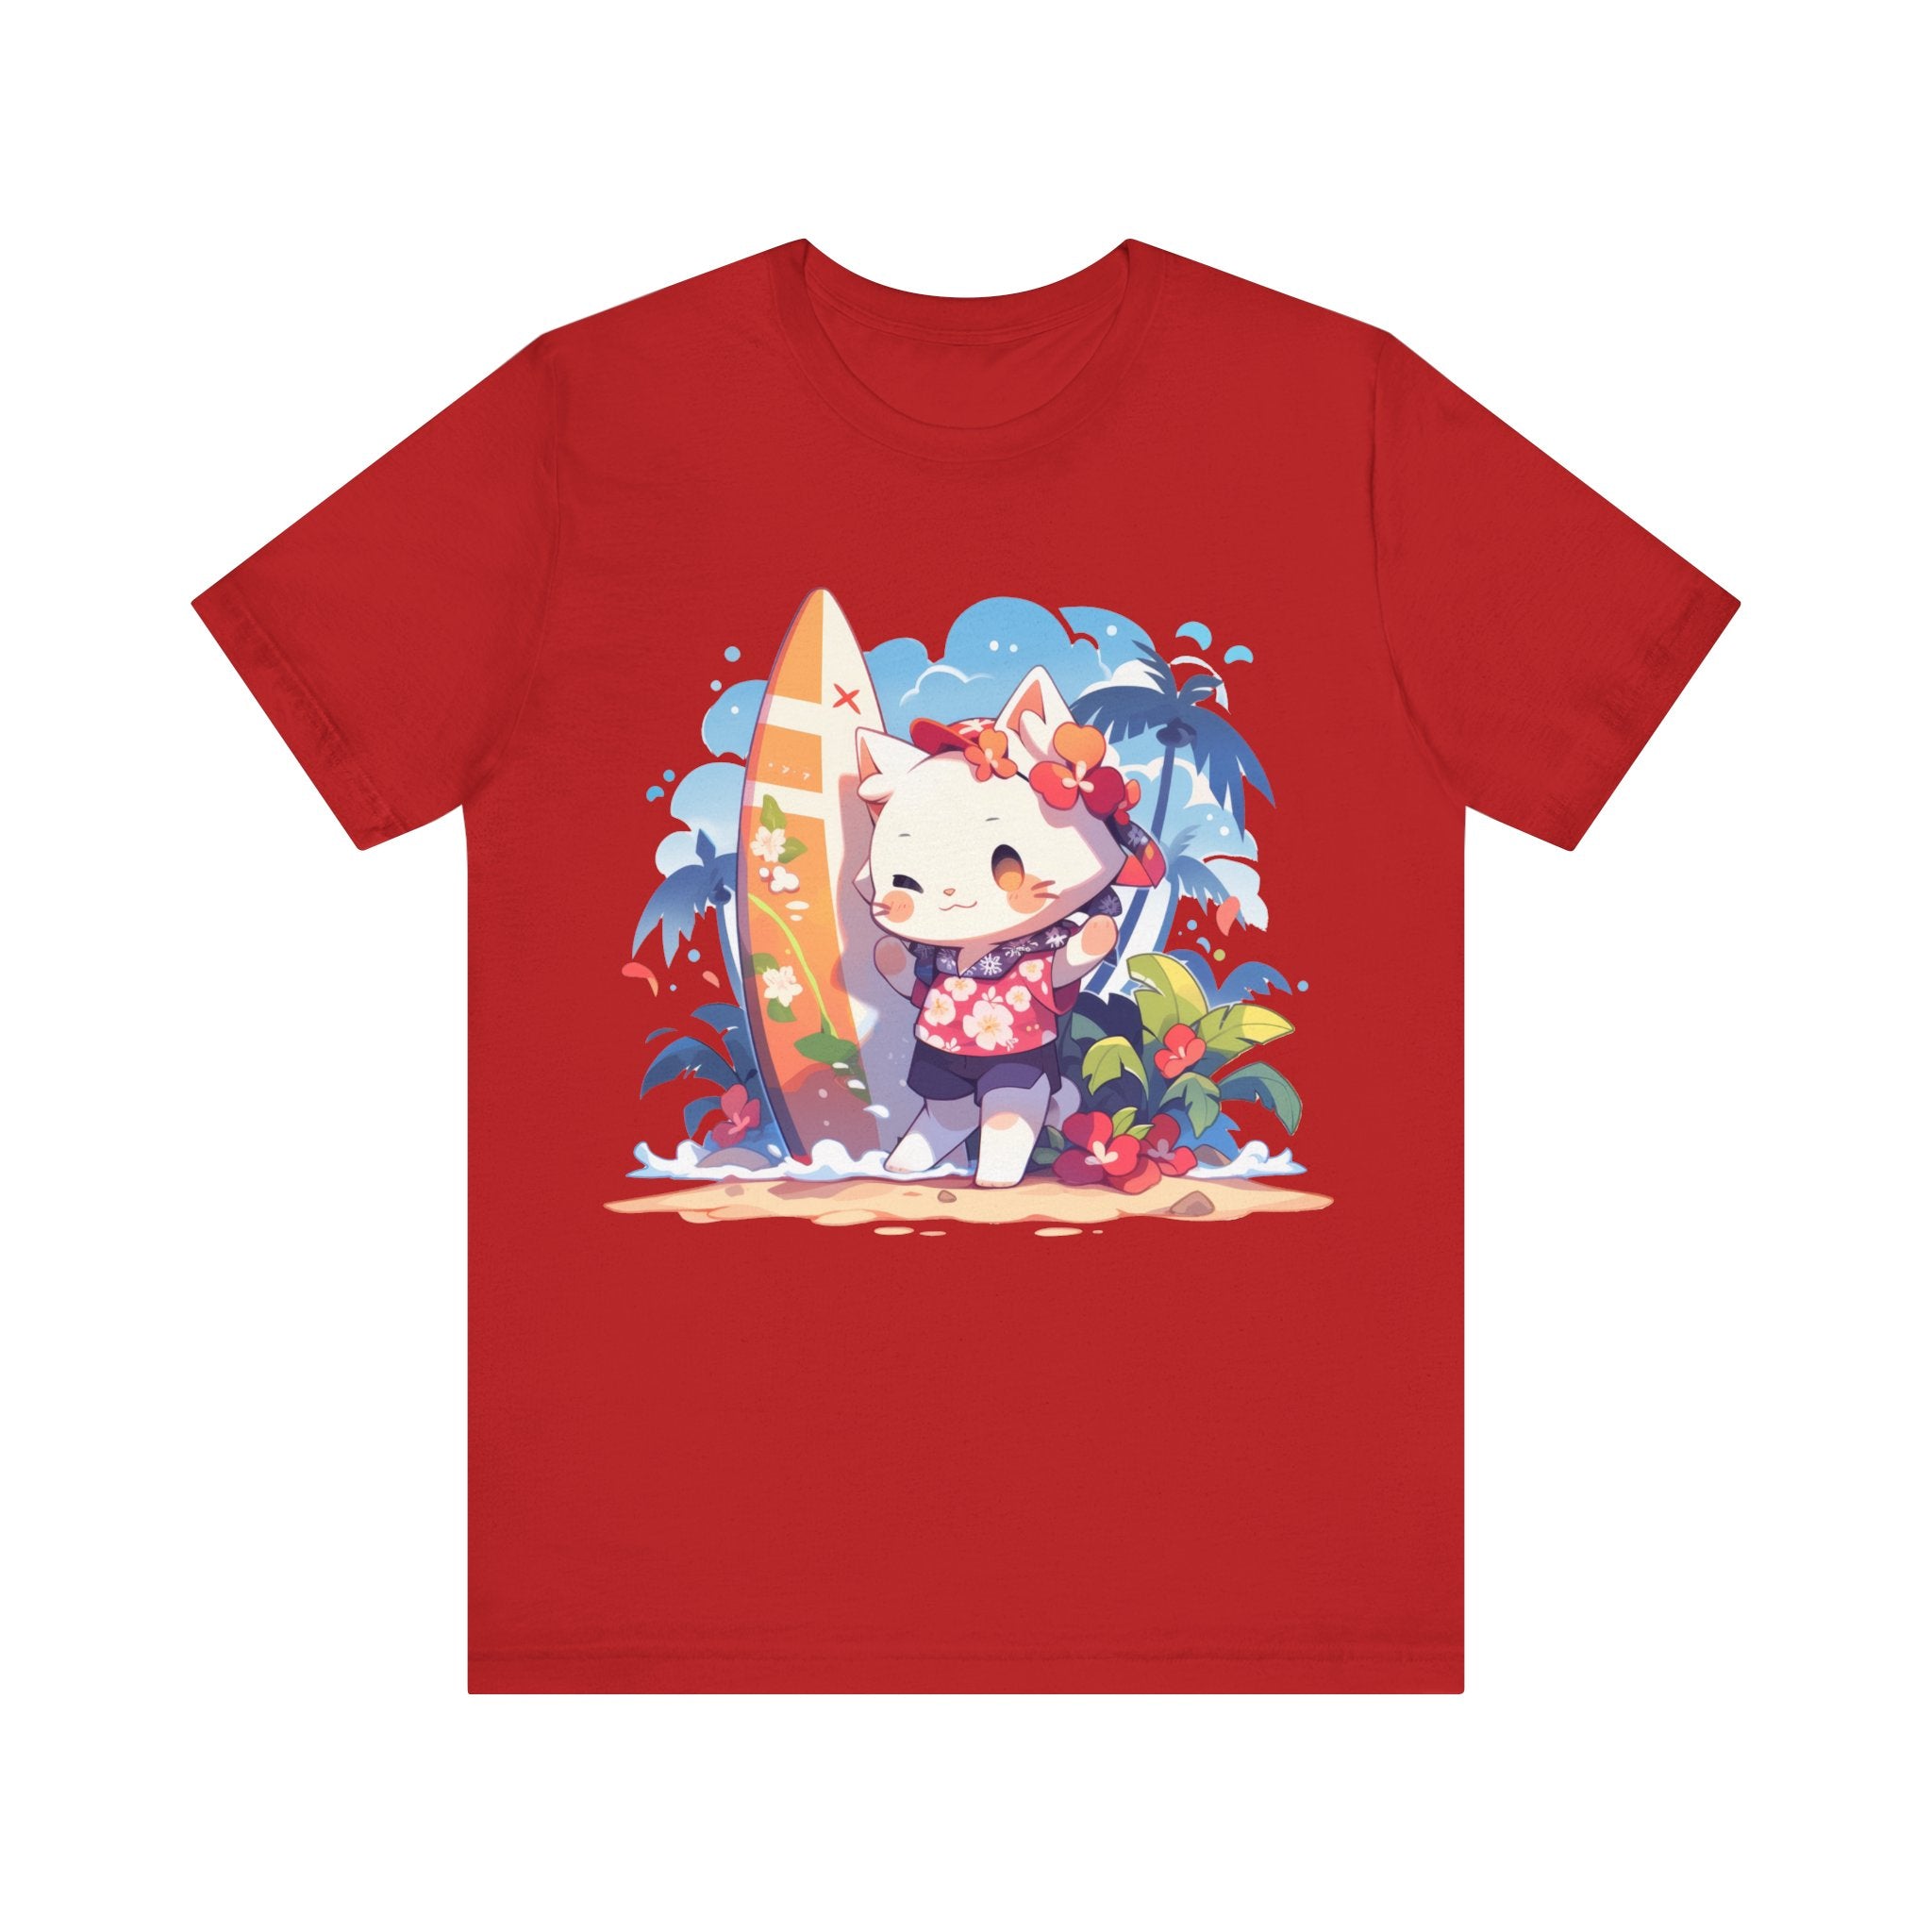 Cute Cat Surfer with Surfboard - MiTo Store